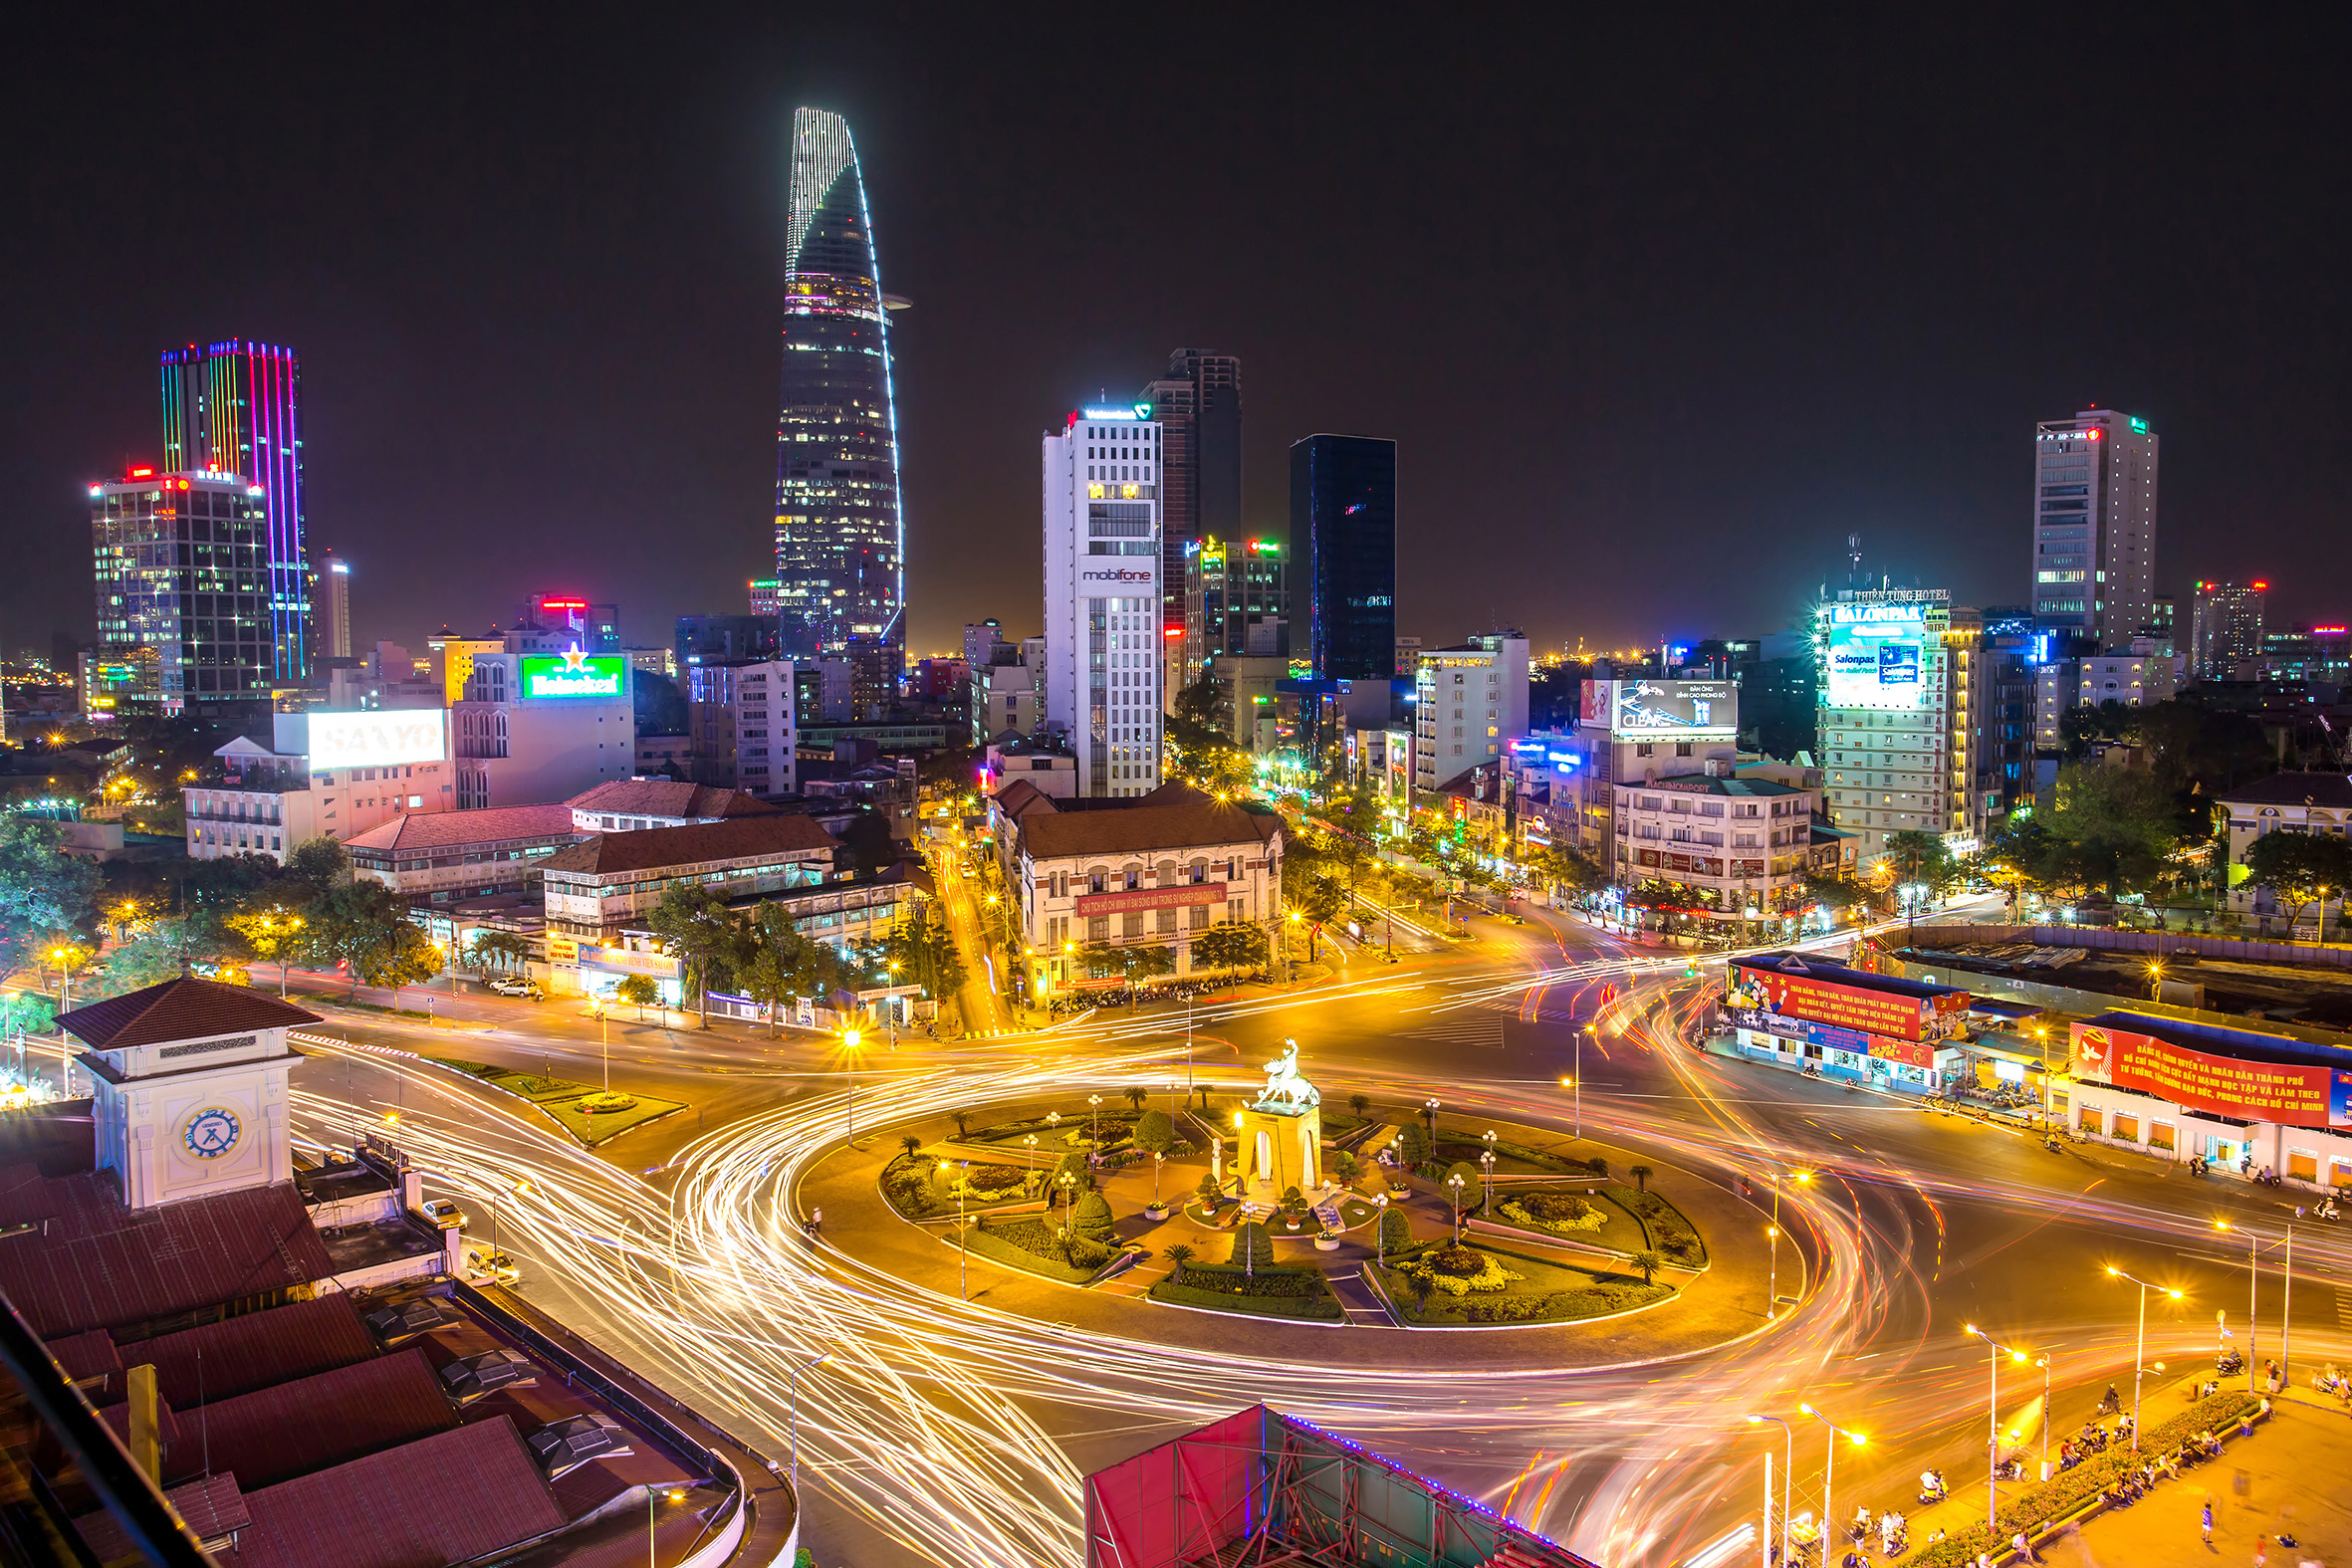 Ho Chi Minh City, Man-made structures, HQ pictures, 4K wallpapers, 2370x1580 HD Desktop